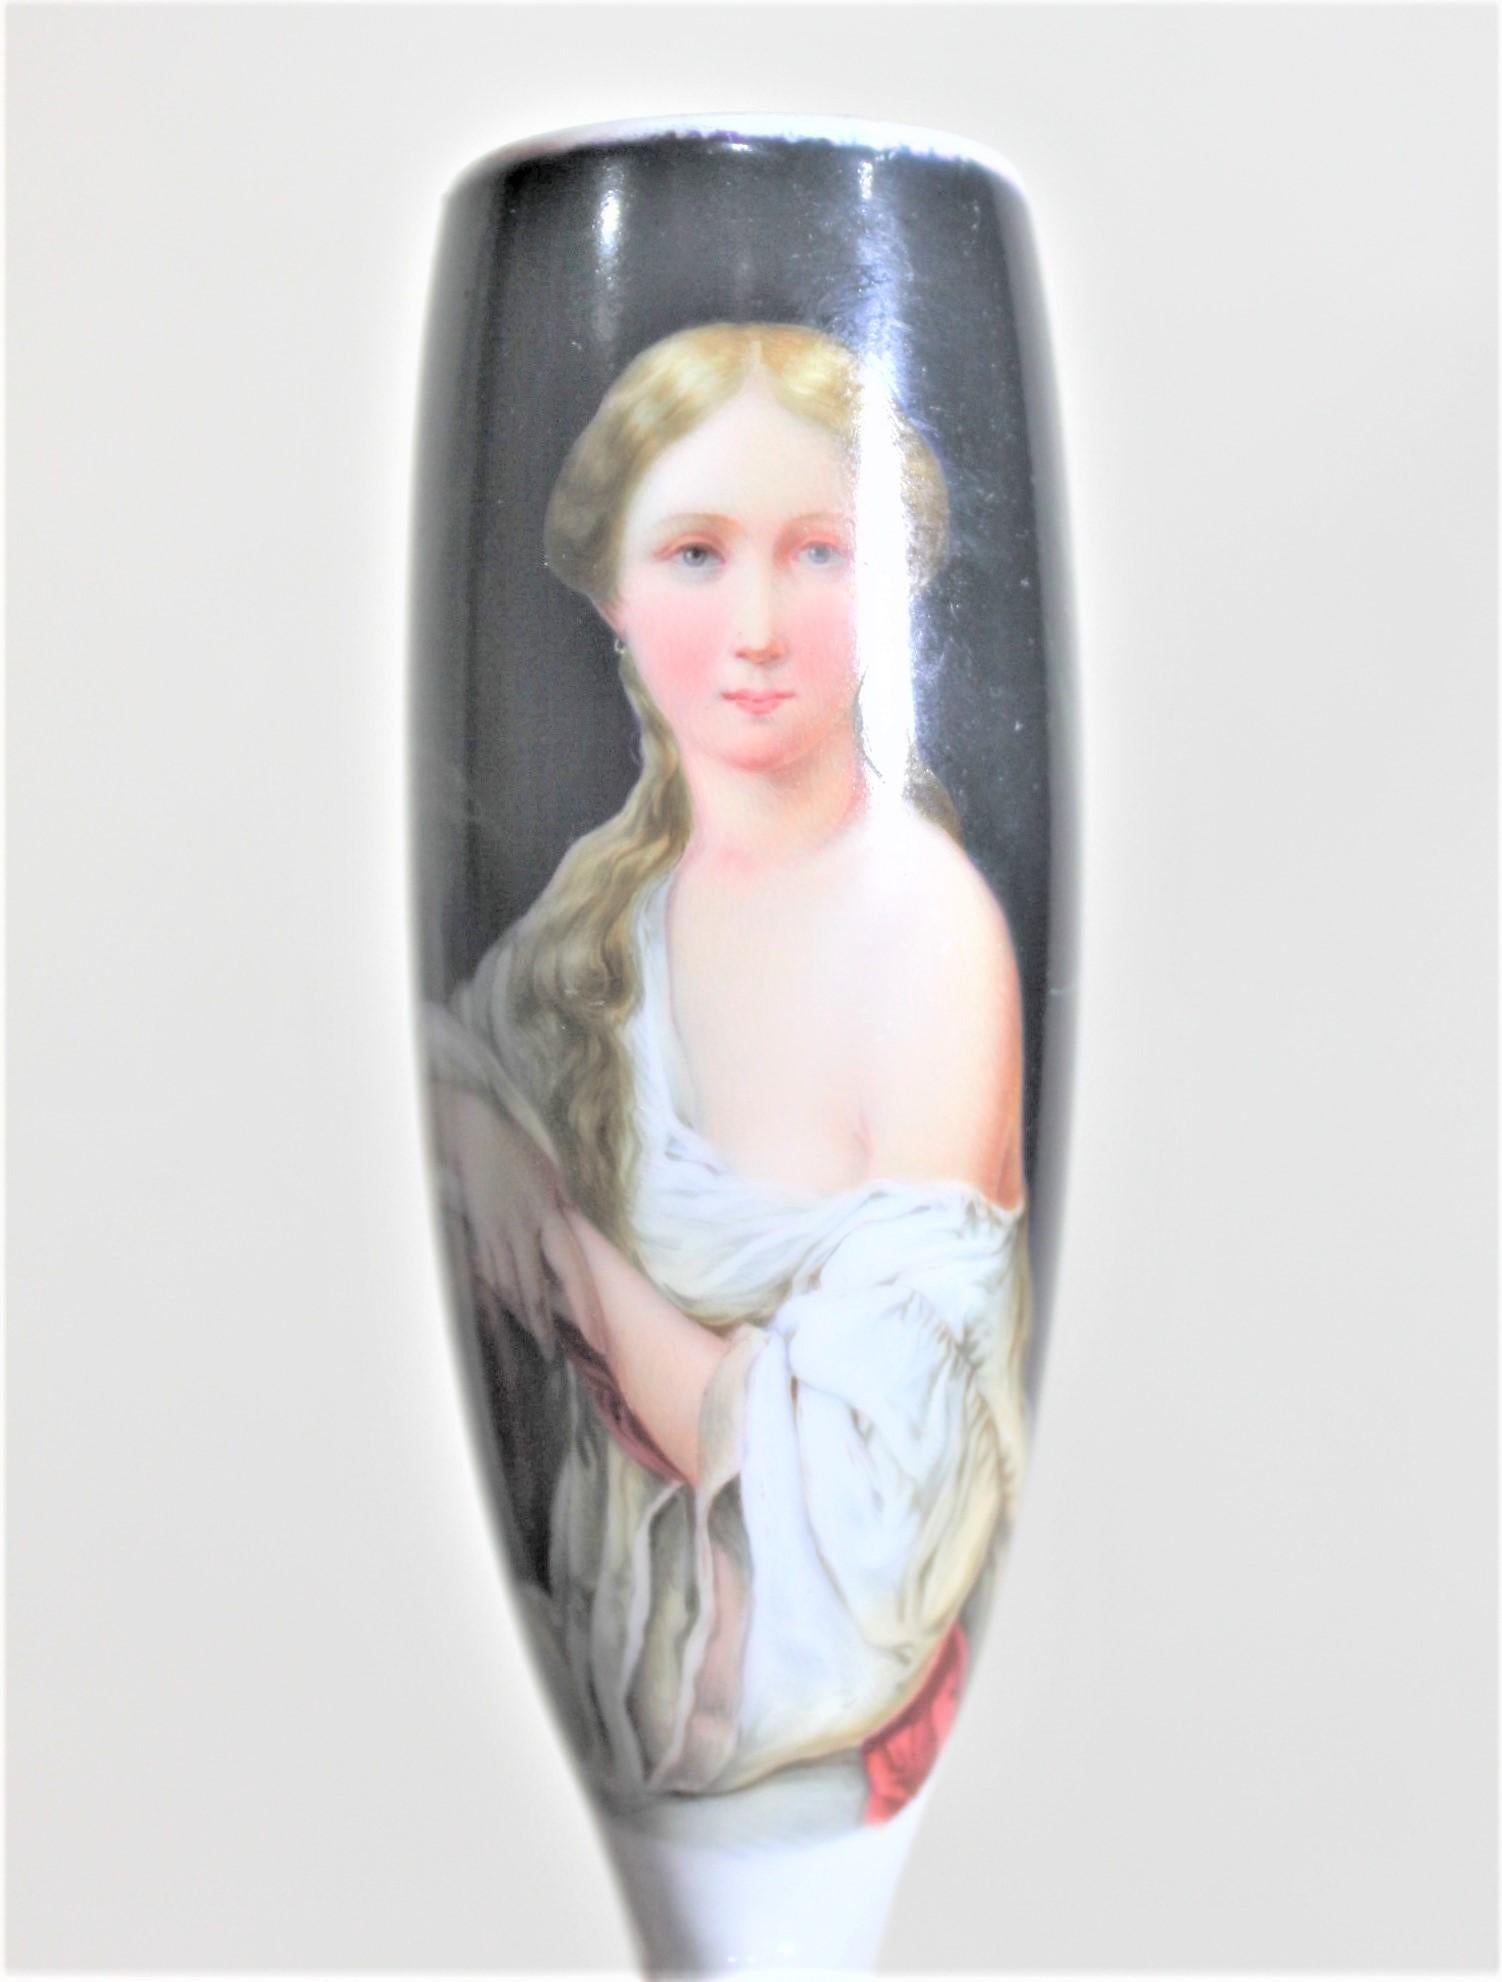 This antique and hand-painted smoking pipe head is unsigned, but presumed to have been made in Austria in approximately 1880 in the period Biedermeier style. This tall pipe bowl has a very well executed hand-painted female portrait in period costume